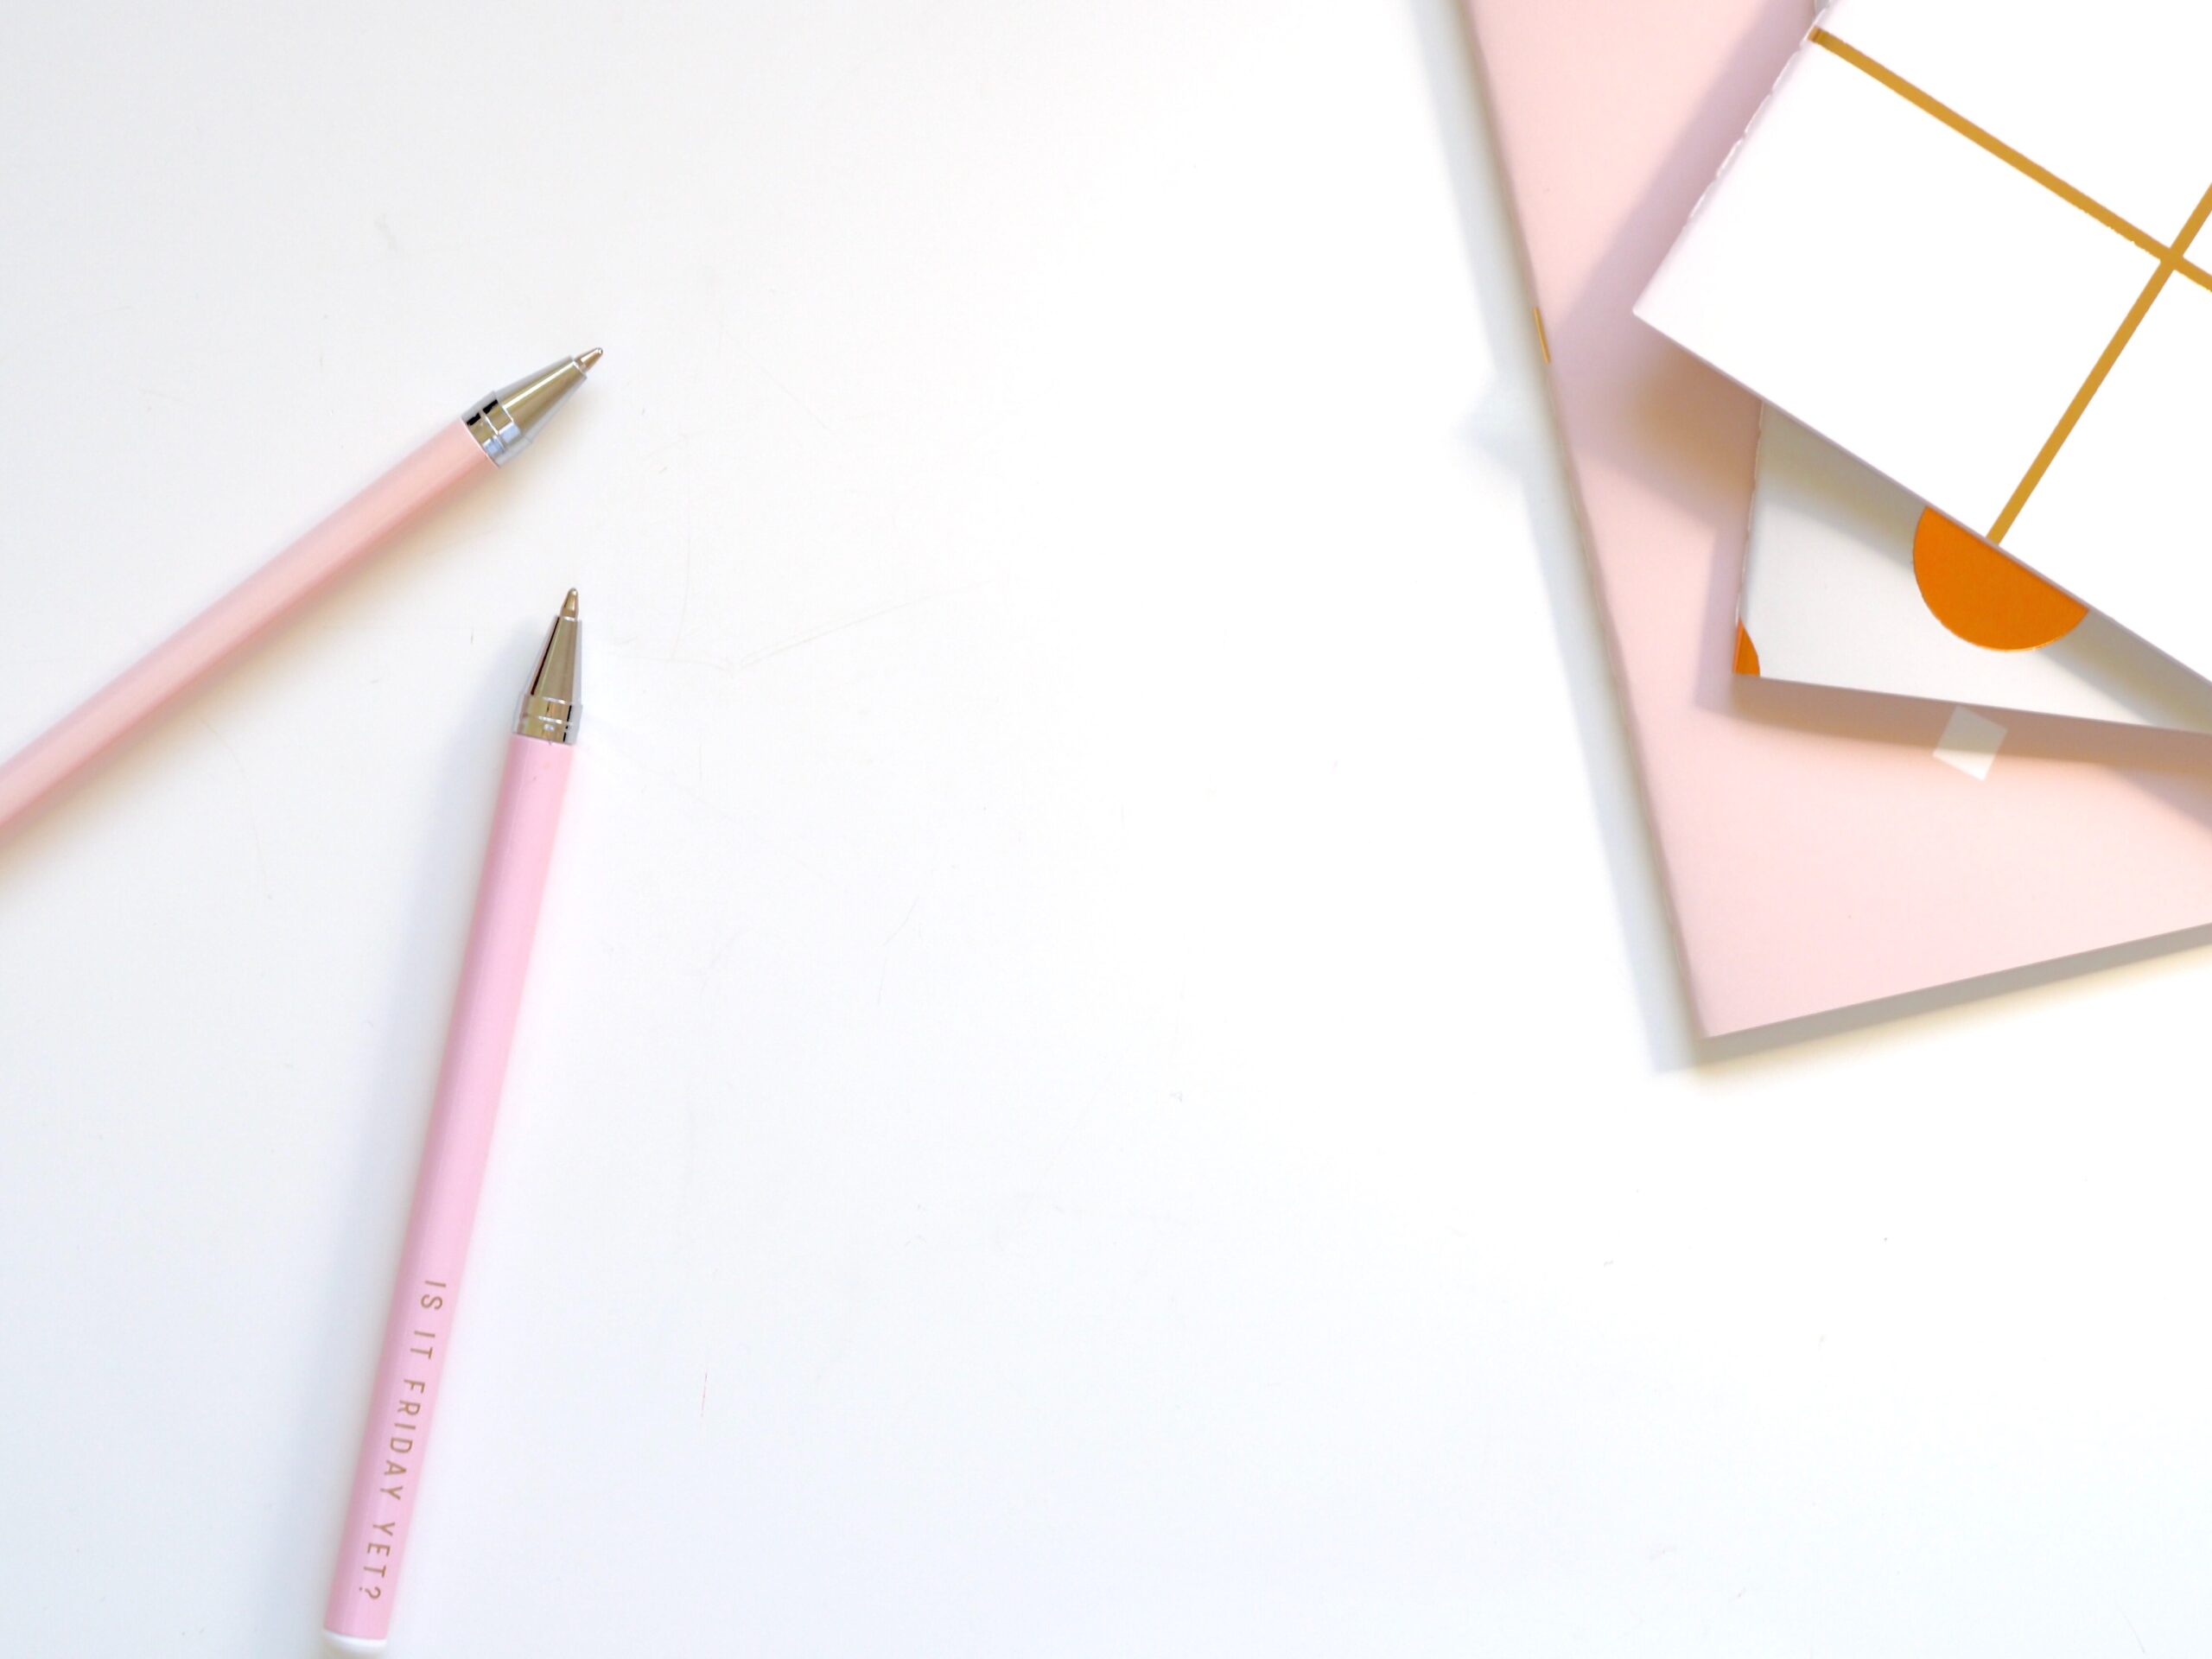 Black-Owned Stationery Brands To Support